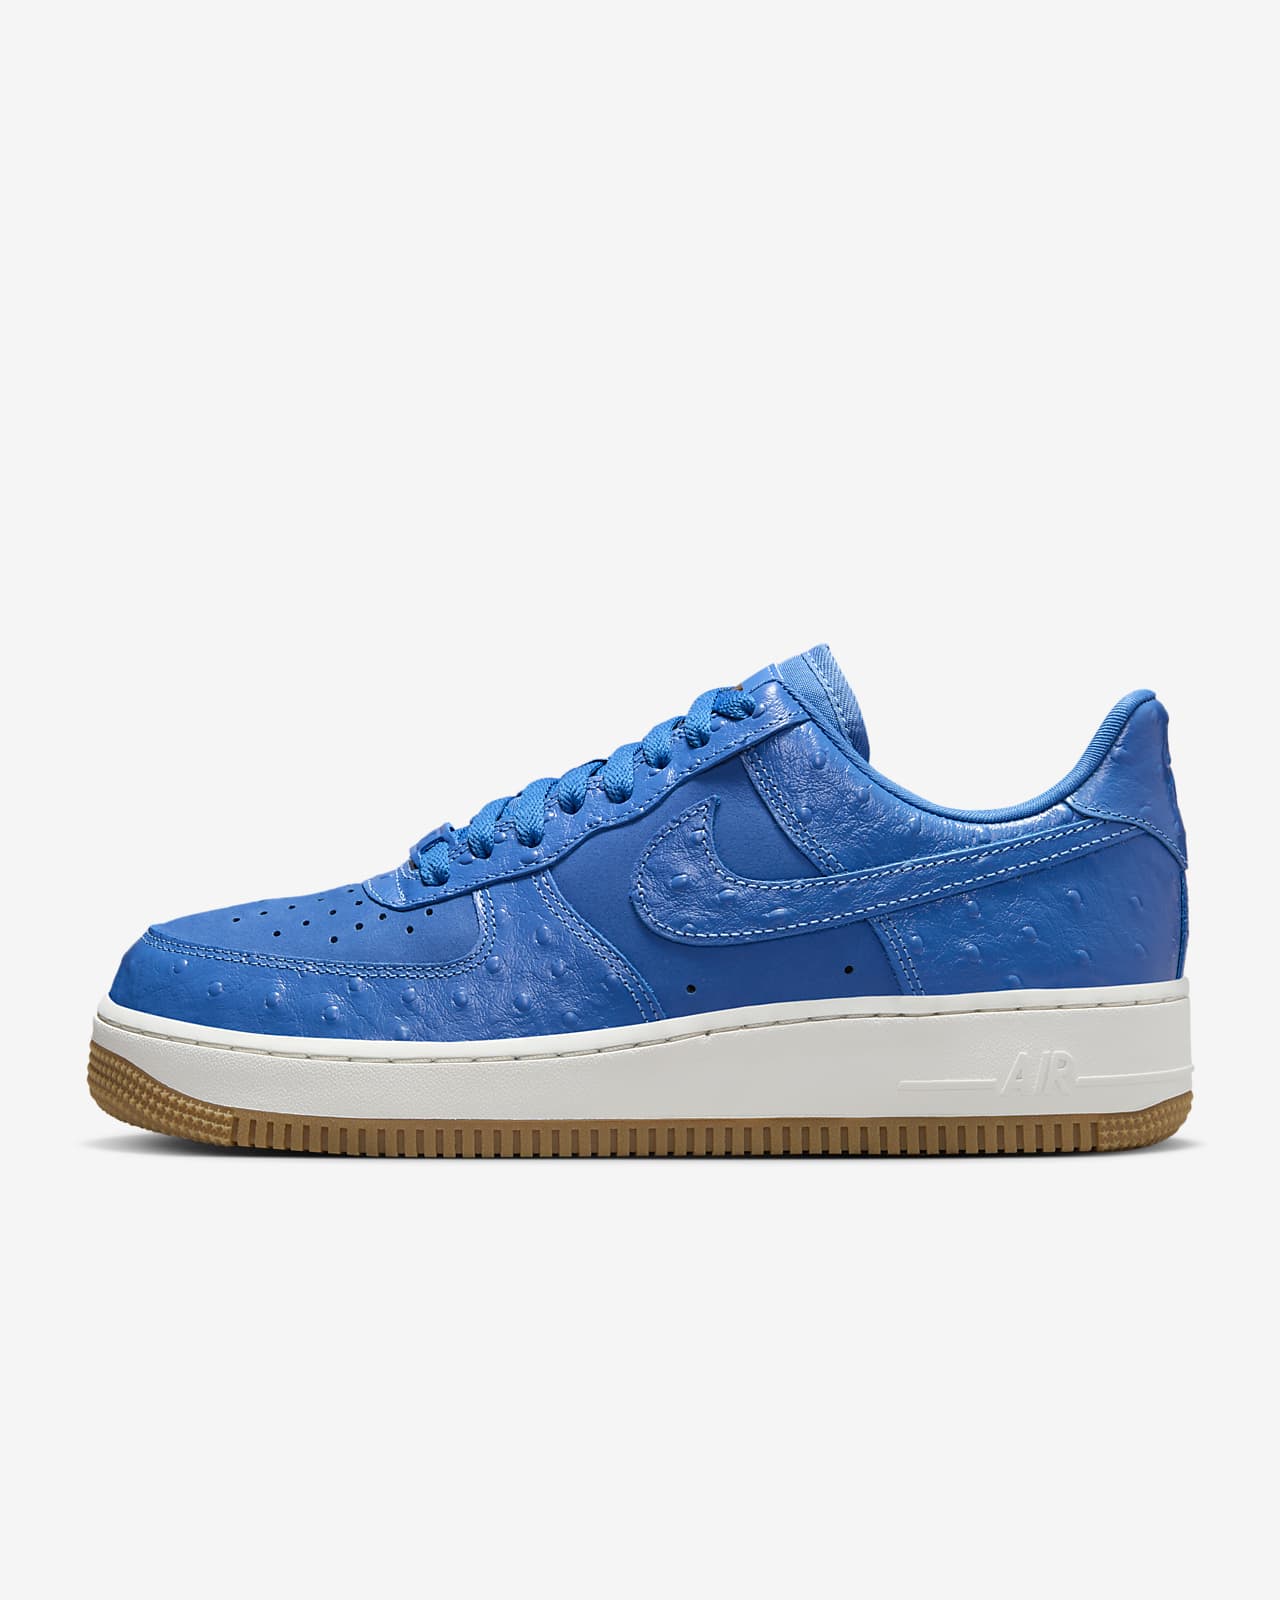 Nike Air Force 1 '07 LX Women's Shoes.